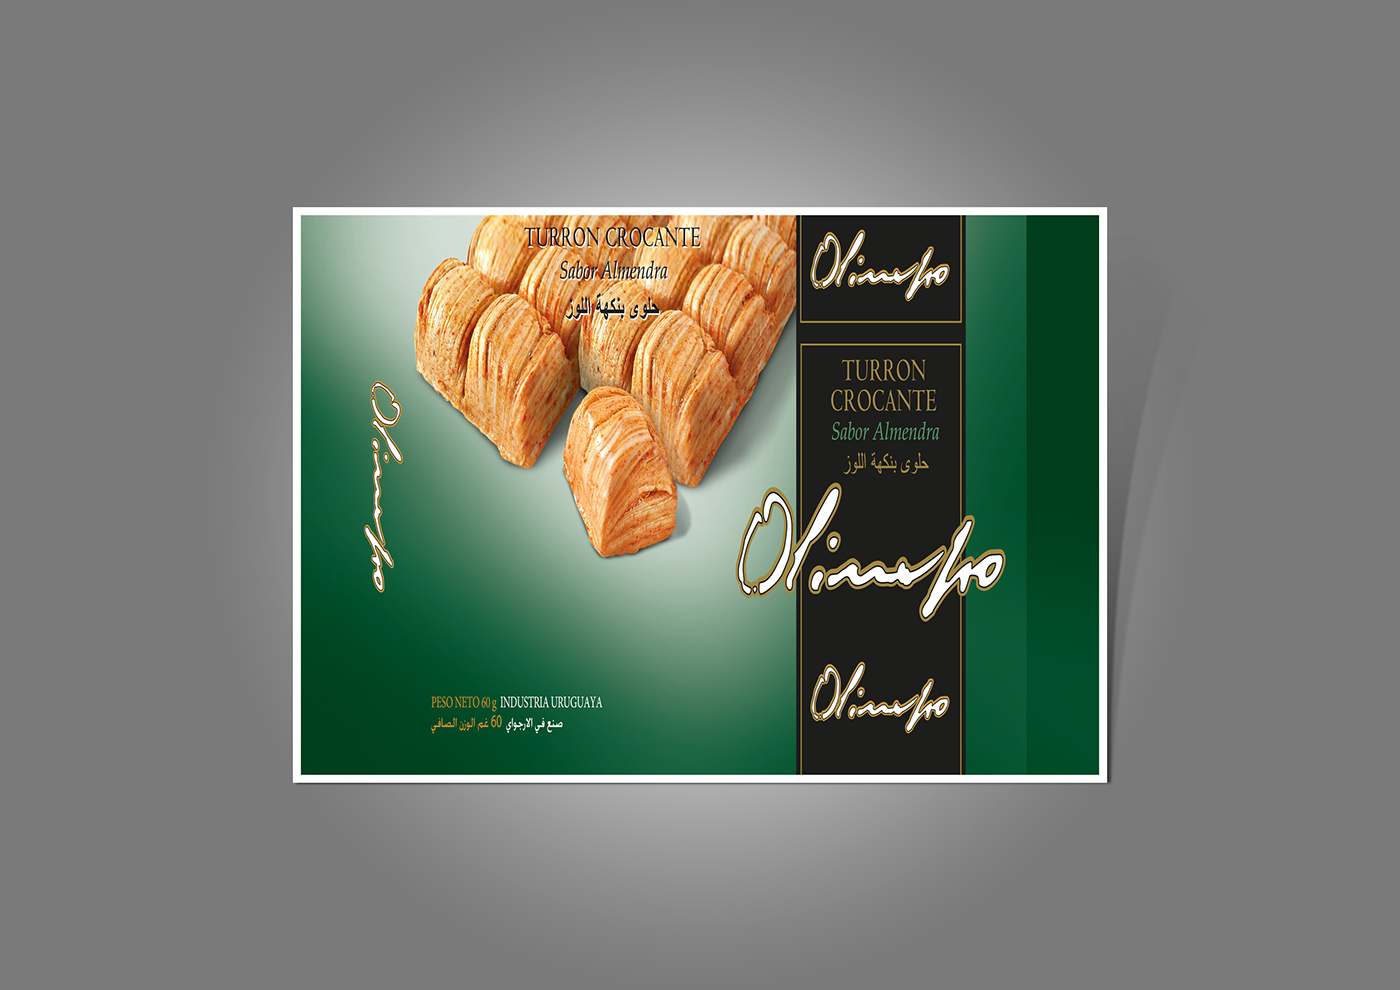 olimpo packaging design